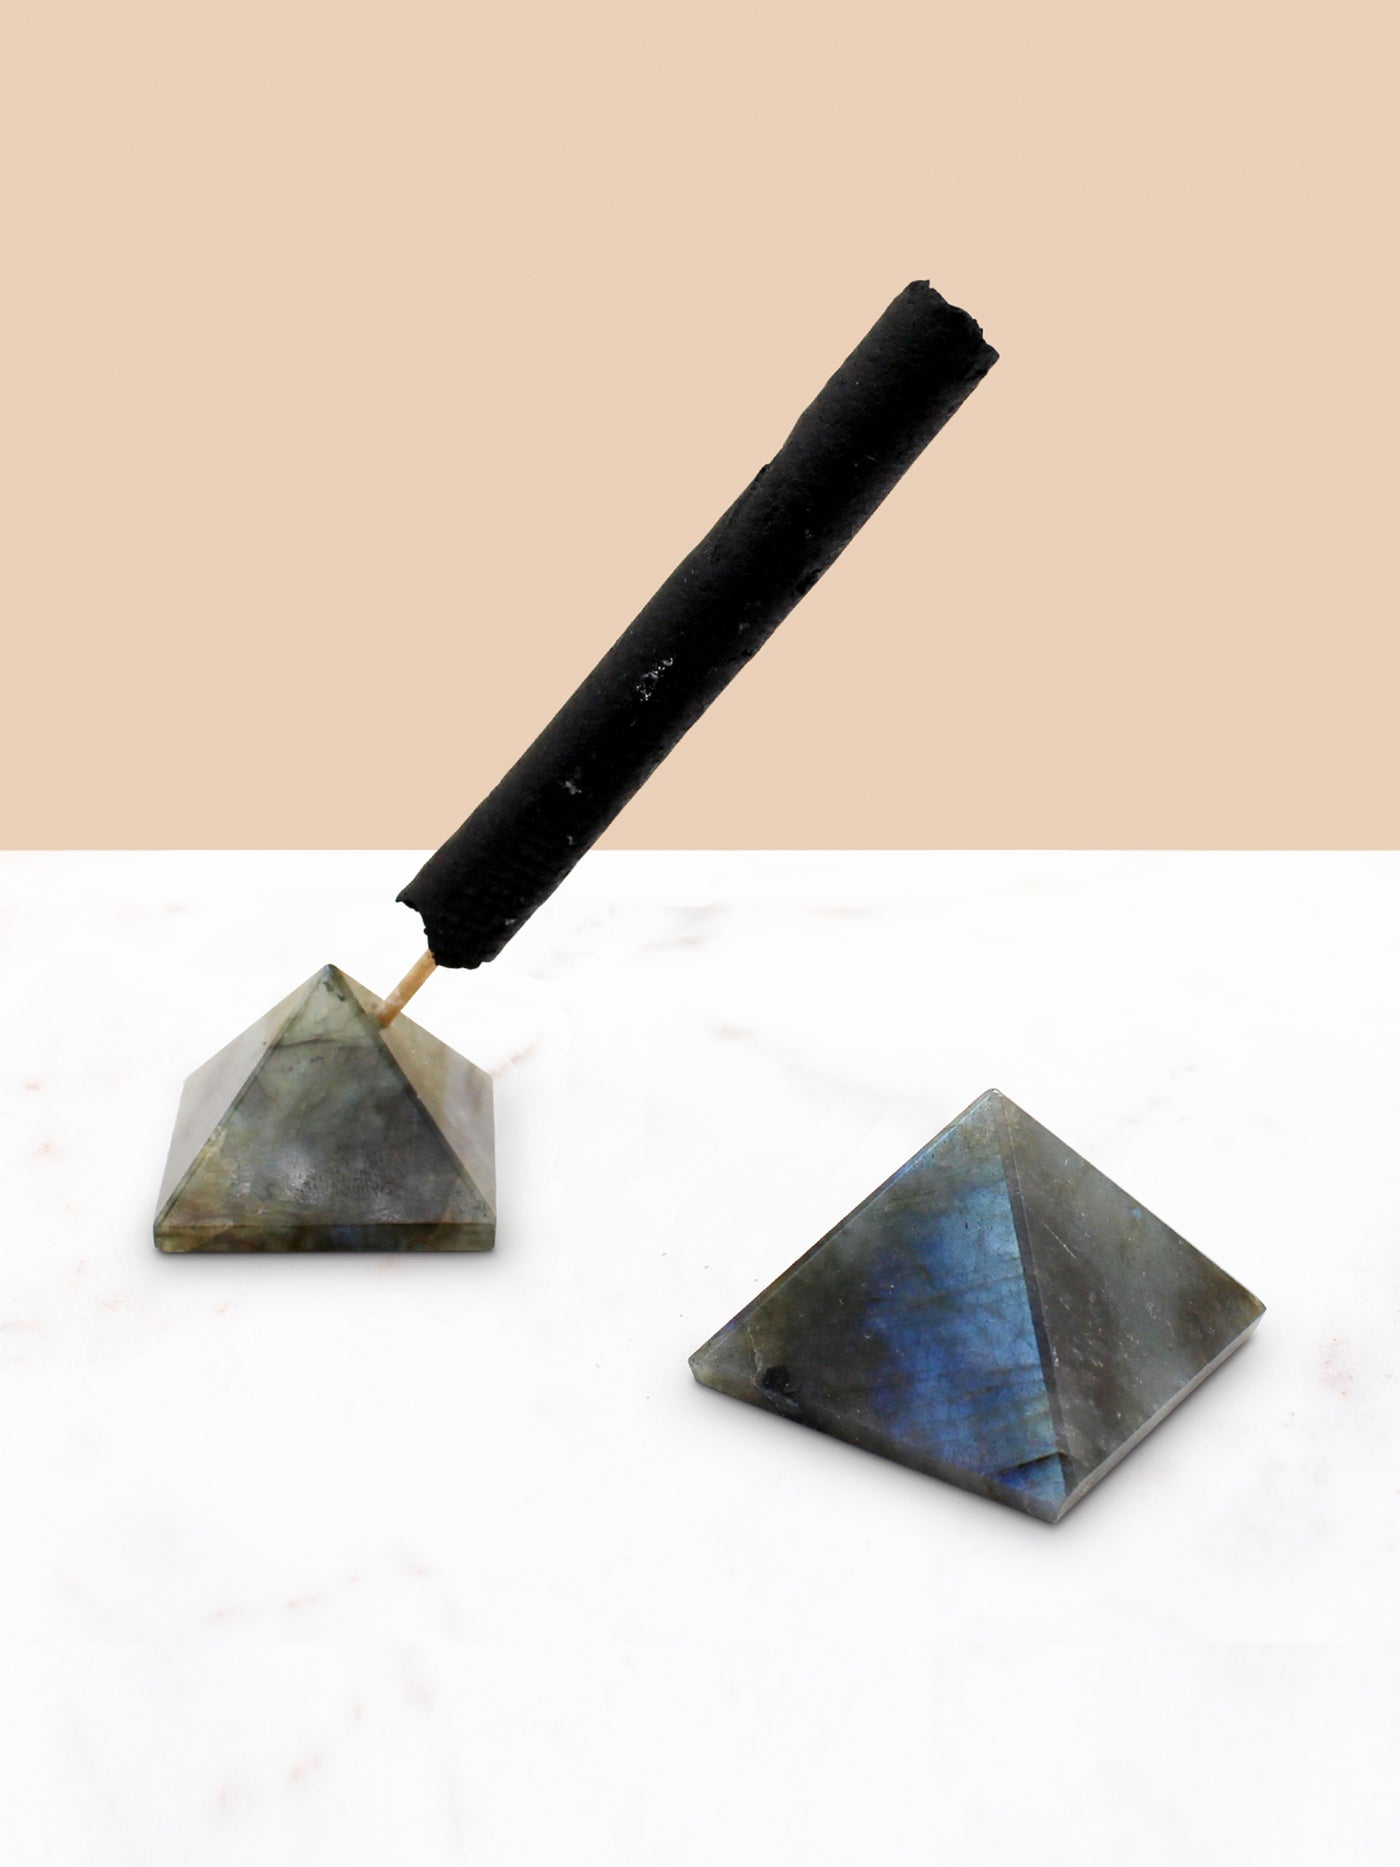 Labradorite Crystal Pyramid Incense Stand + Rope Set. LABRADORITE protects against negativity and misfortunes. Also reduces stress and anxiety, increases intuition, helps with subconscious issues, and provides mental clarity. Thought to awaken one's magical powers. Great for workspaces, as it helps dealing with transitions and everyday challenges, and will help to equip you with what you need to be successful in your field.